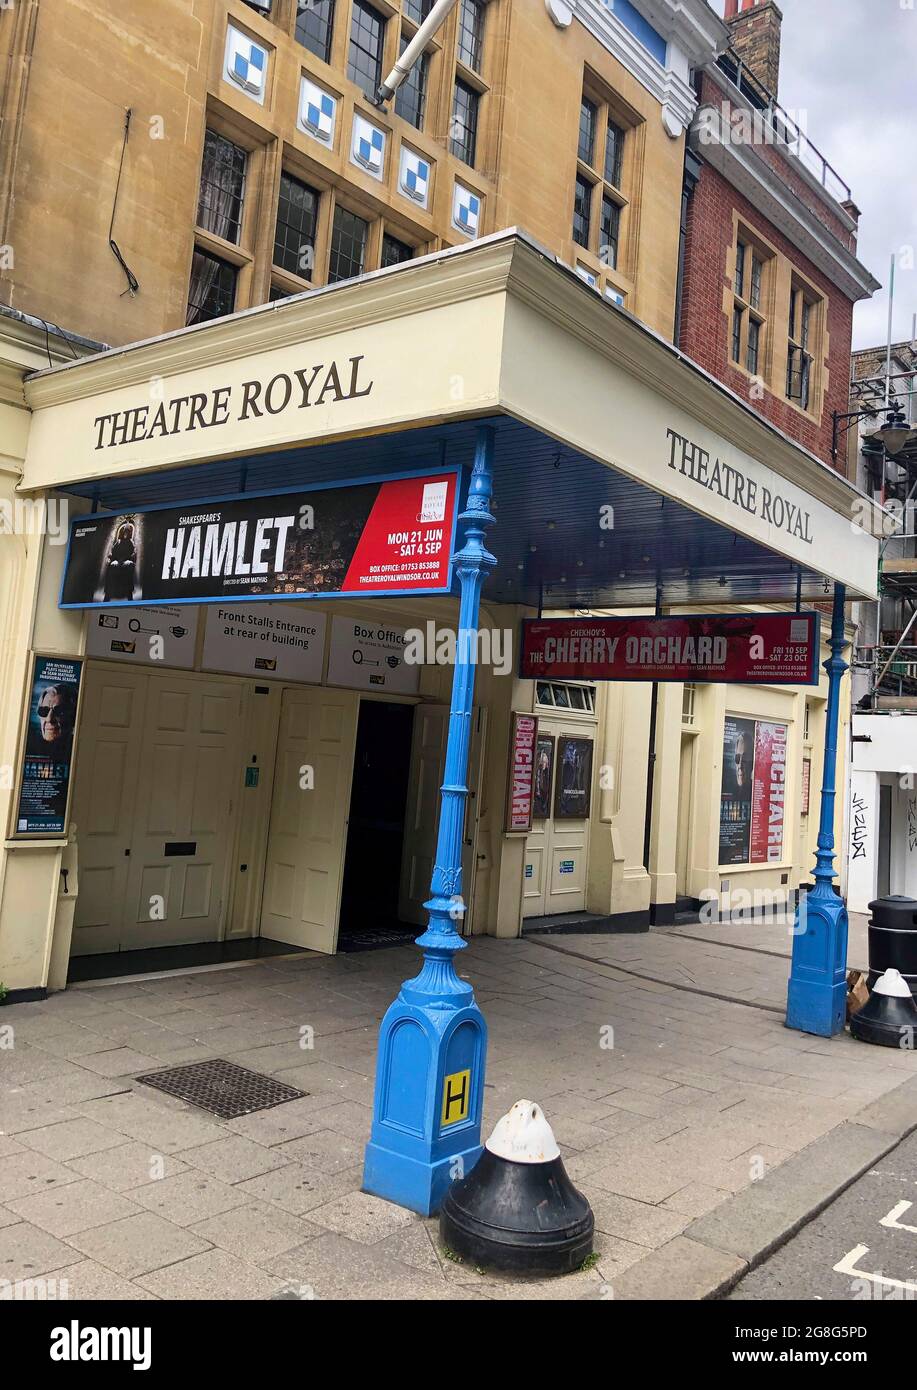 front entrance to the Theatre Royal Windsor, England displaying a poster for HAMLET by Shakespeare starring Sir Ian McKellen as the Danish Prince, running from June to September 2021. Directed by Sian Mathias and produced by Bill Kenwright this is a reimagined age, colour blind and gender blind production. Stock Photo